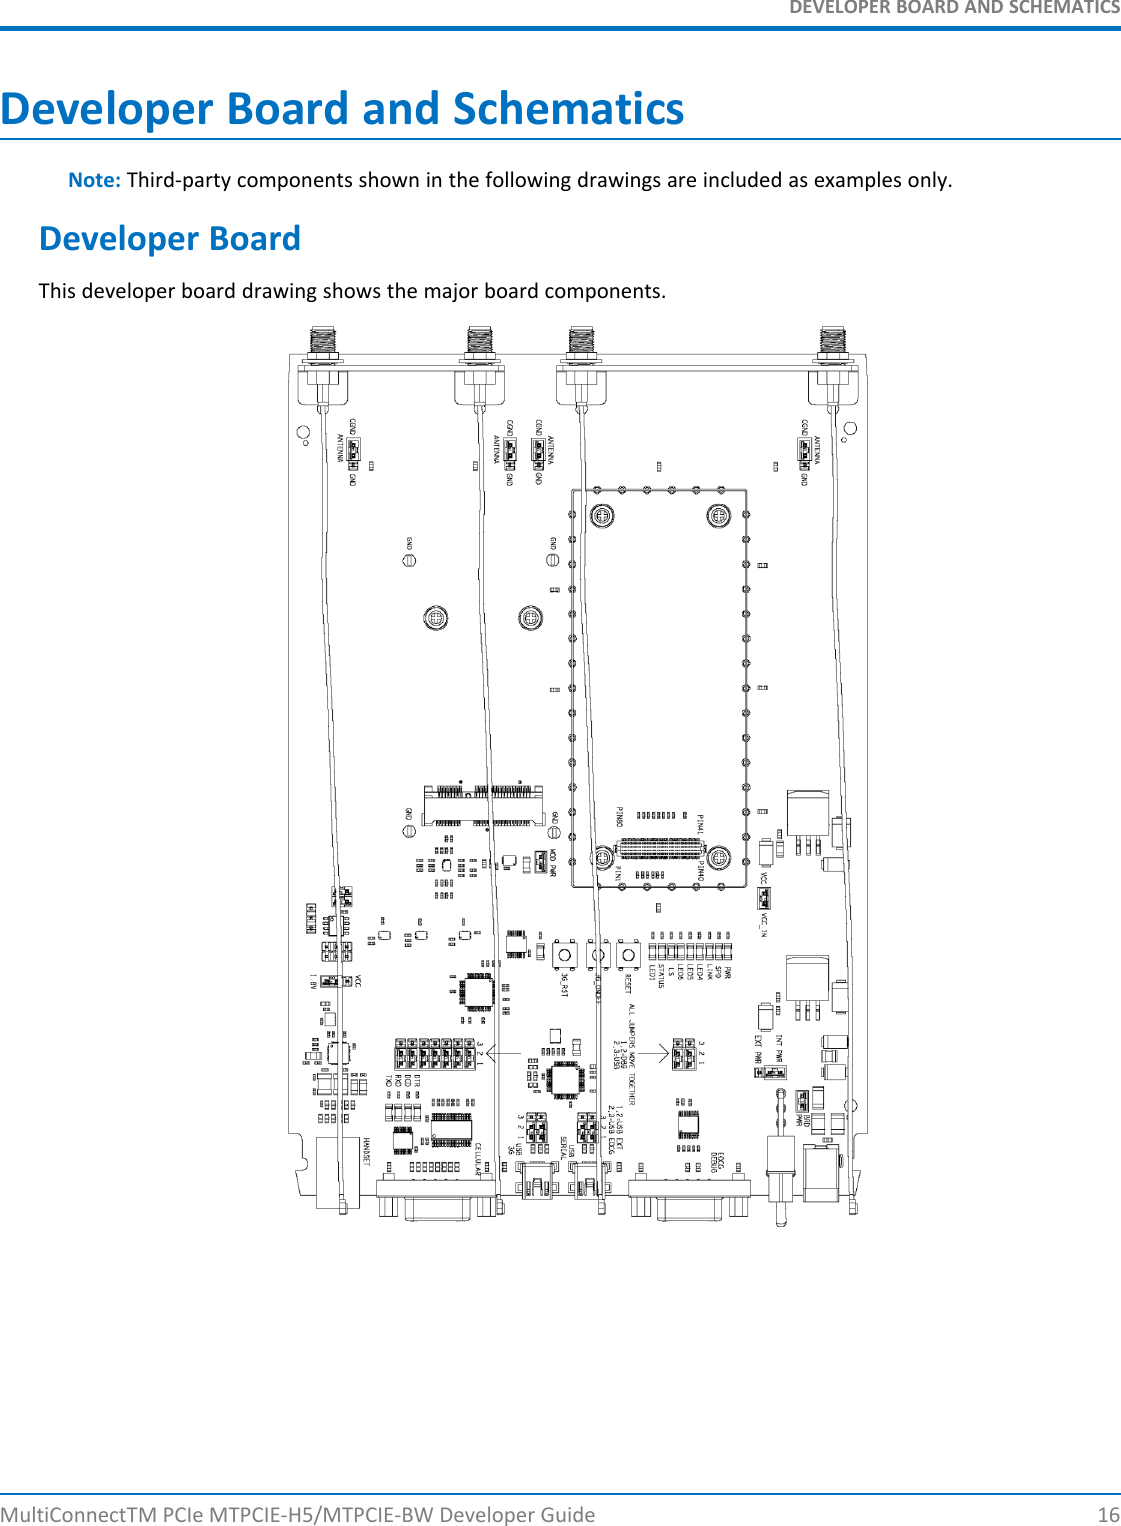 DEVELOPER BOARD AND SCHEMATICSDeveloper Board and SchematicsNote: Third-party components shown in the following drawings are included as examples only.Developer BoardThis developer board drawing shows the major board components.MultiConnectTM PCIe MTPCIE-H5/MTPCIE-BW Developer Guide 16